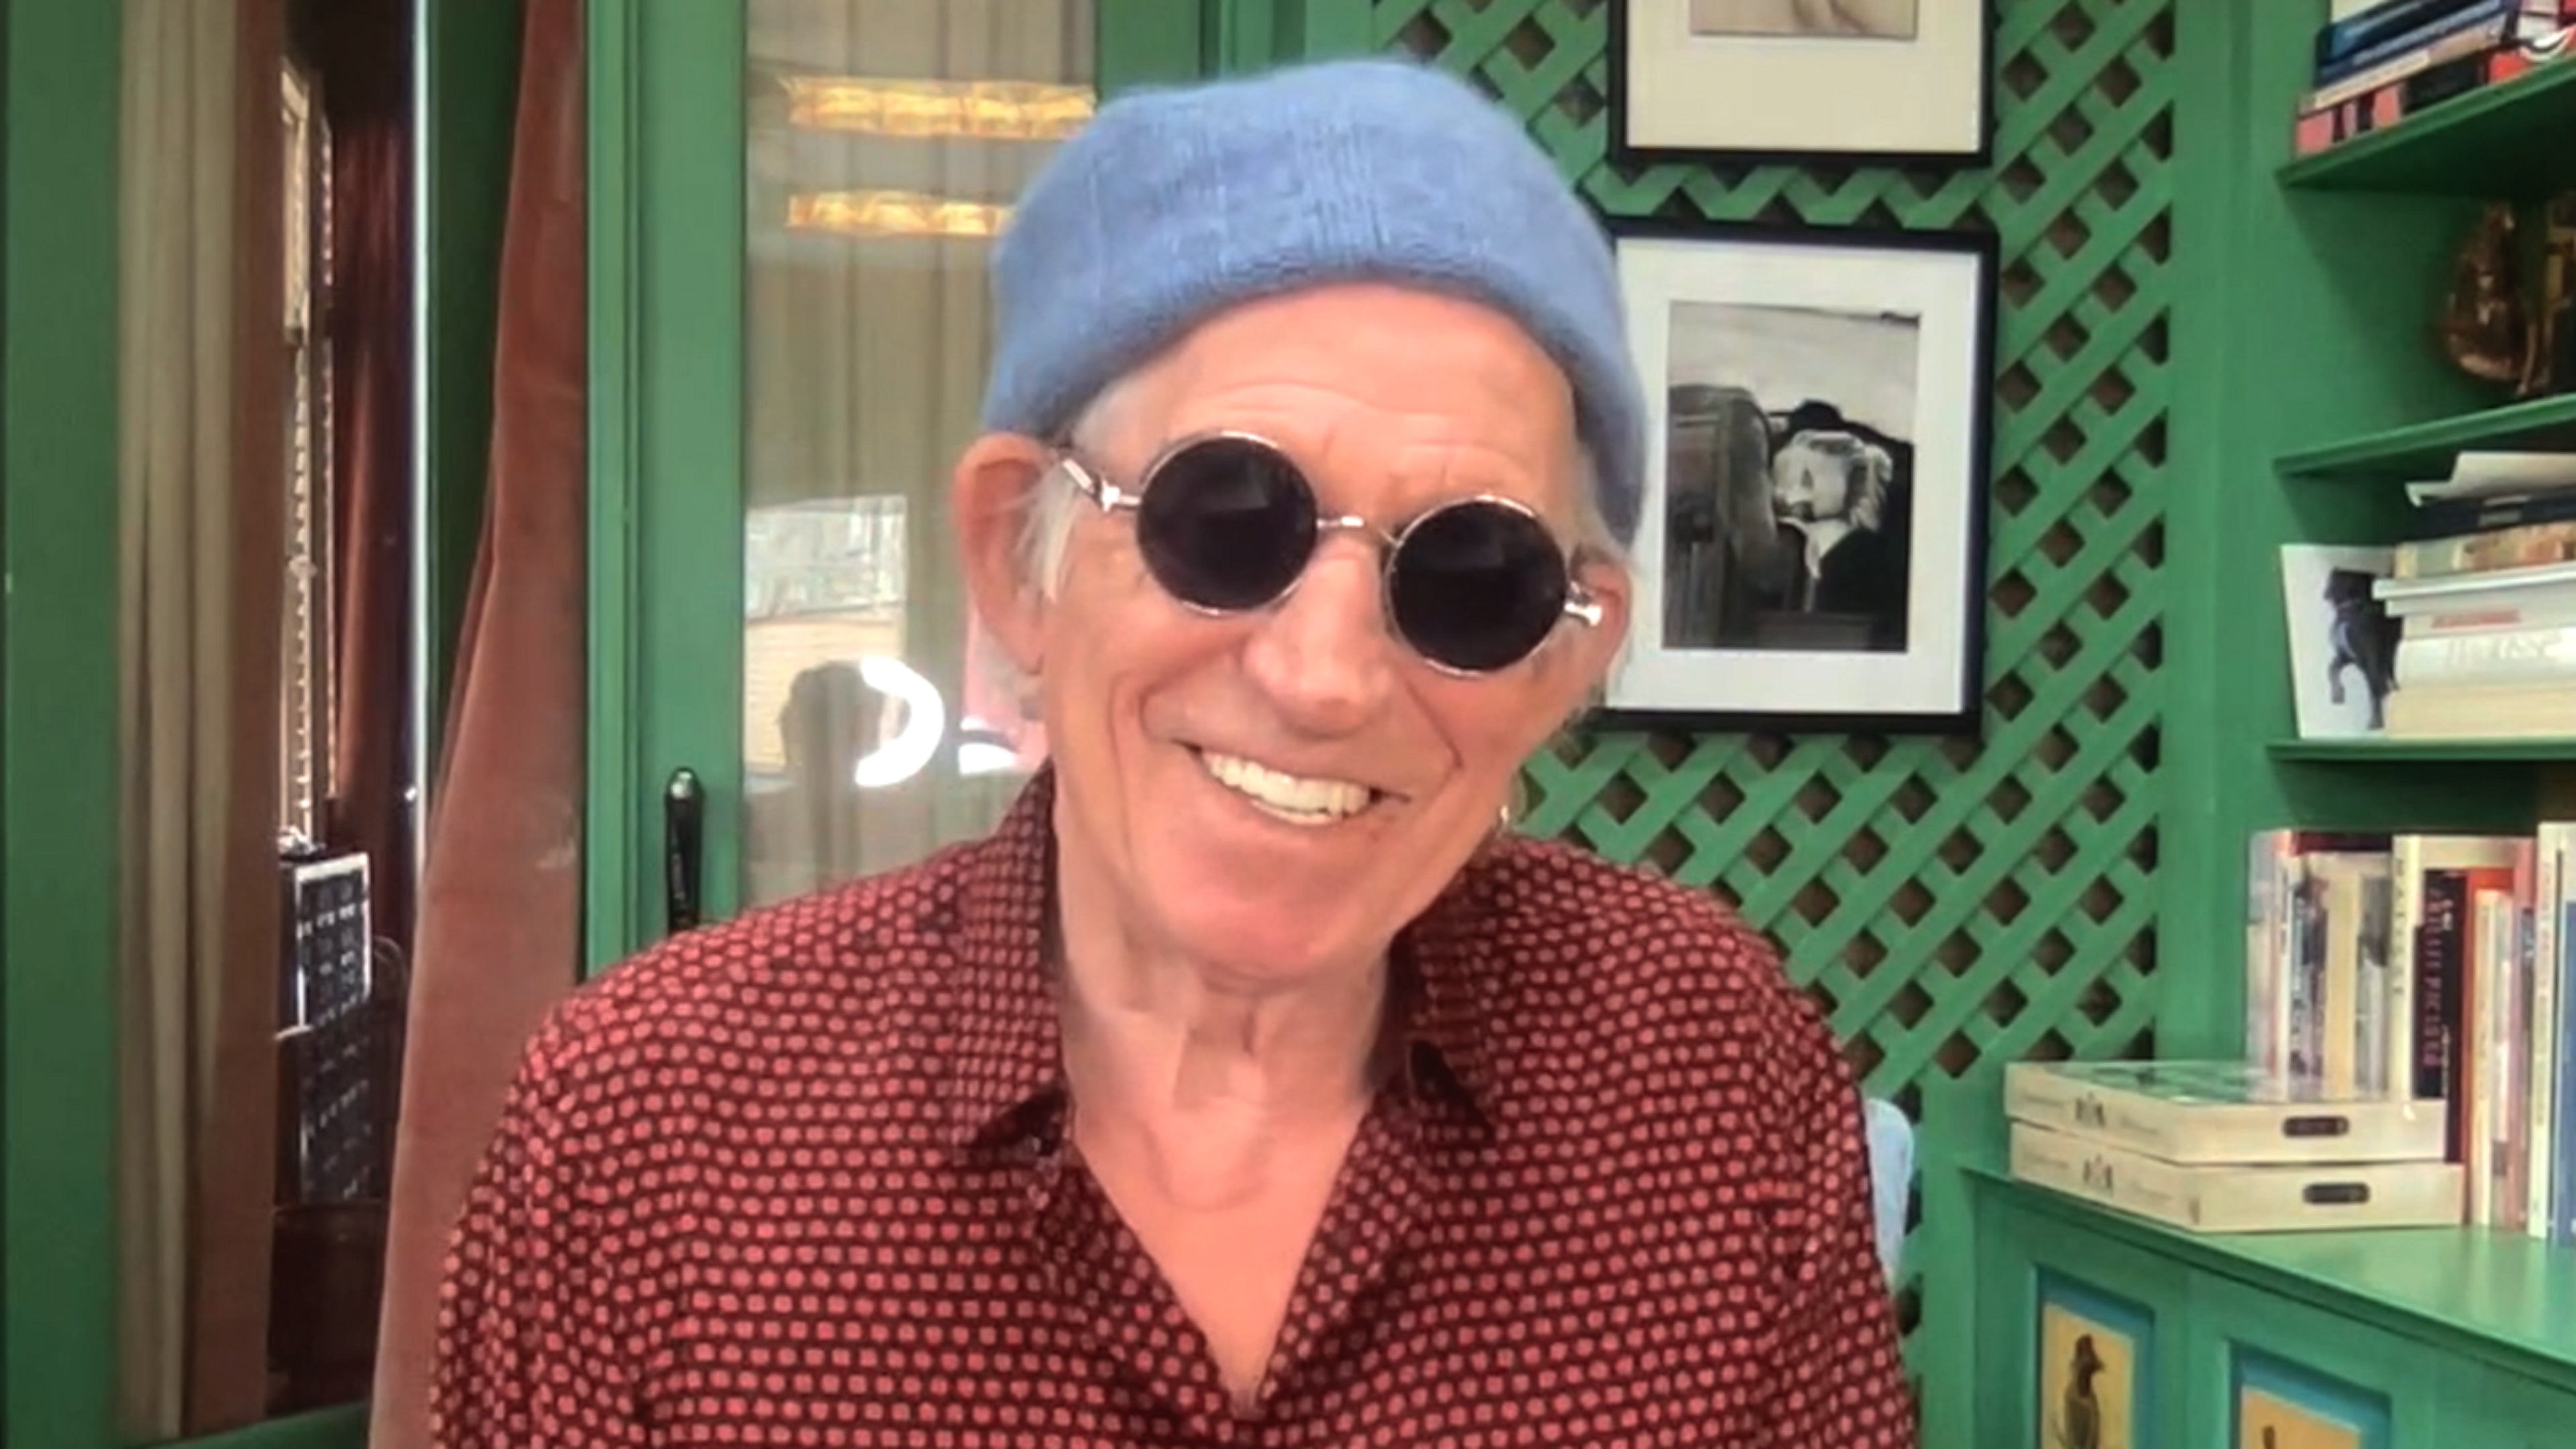 Keith Richards Tells Apple Music About The 30th Anniversary of 'Main Offender', What He Learned From Being a Frontman, Charlie Watts' Role In Connecting Him with Steve Jordan, and More